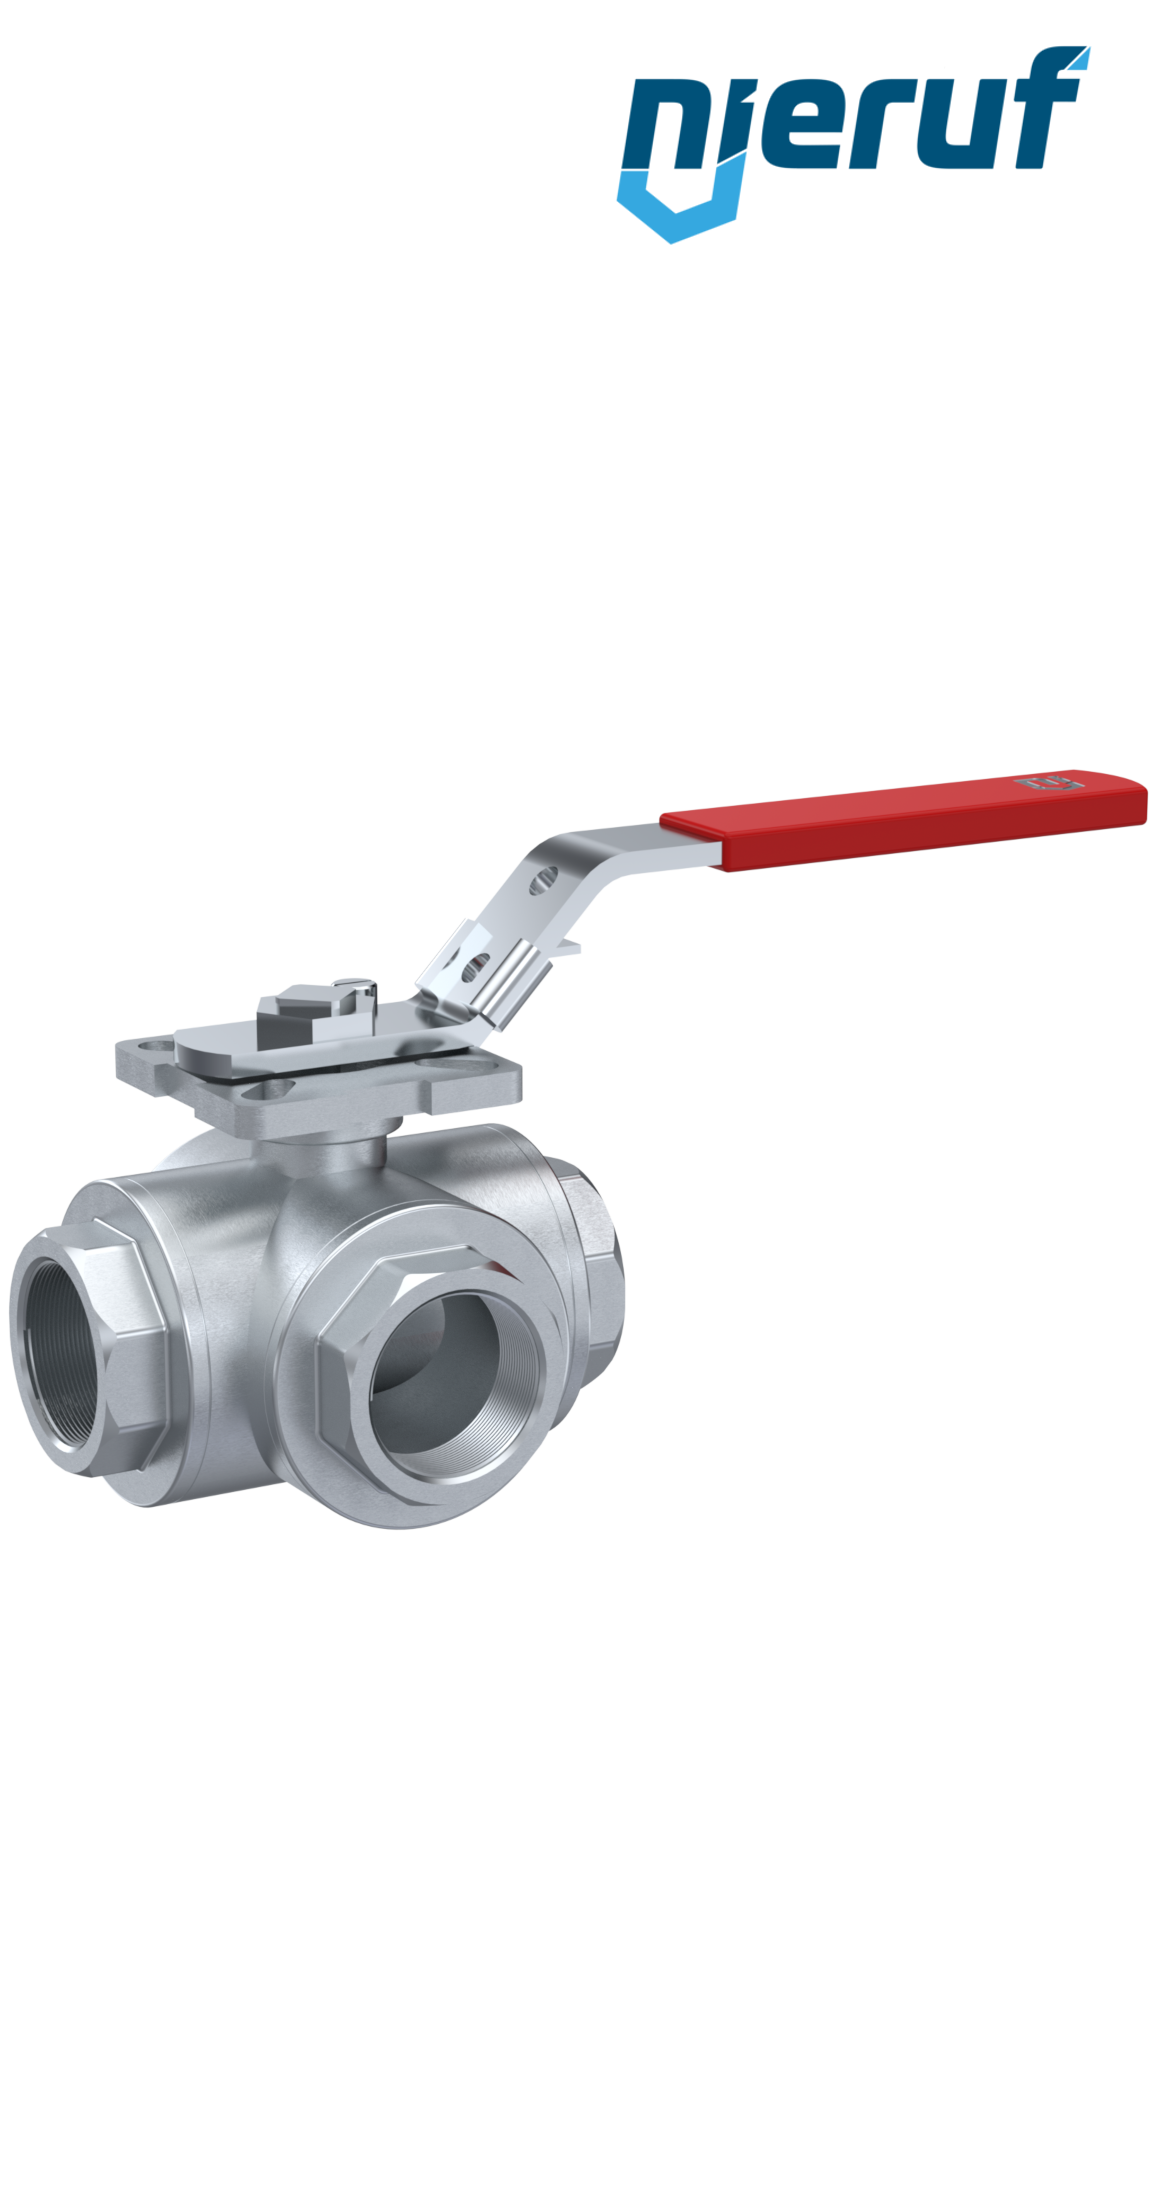 3-way ball valve DN25 - 1" inch GK09 stainless steel L drilling